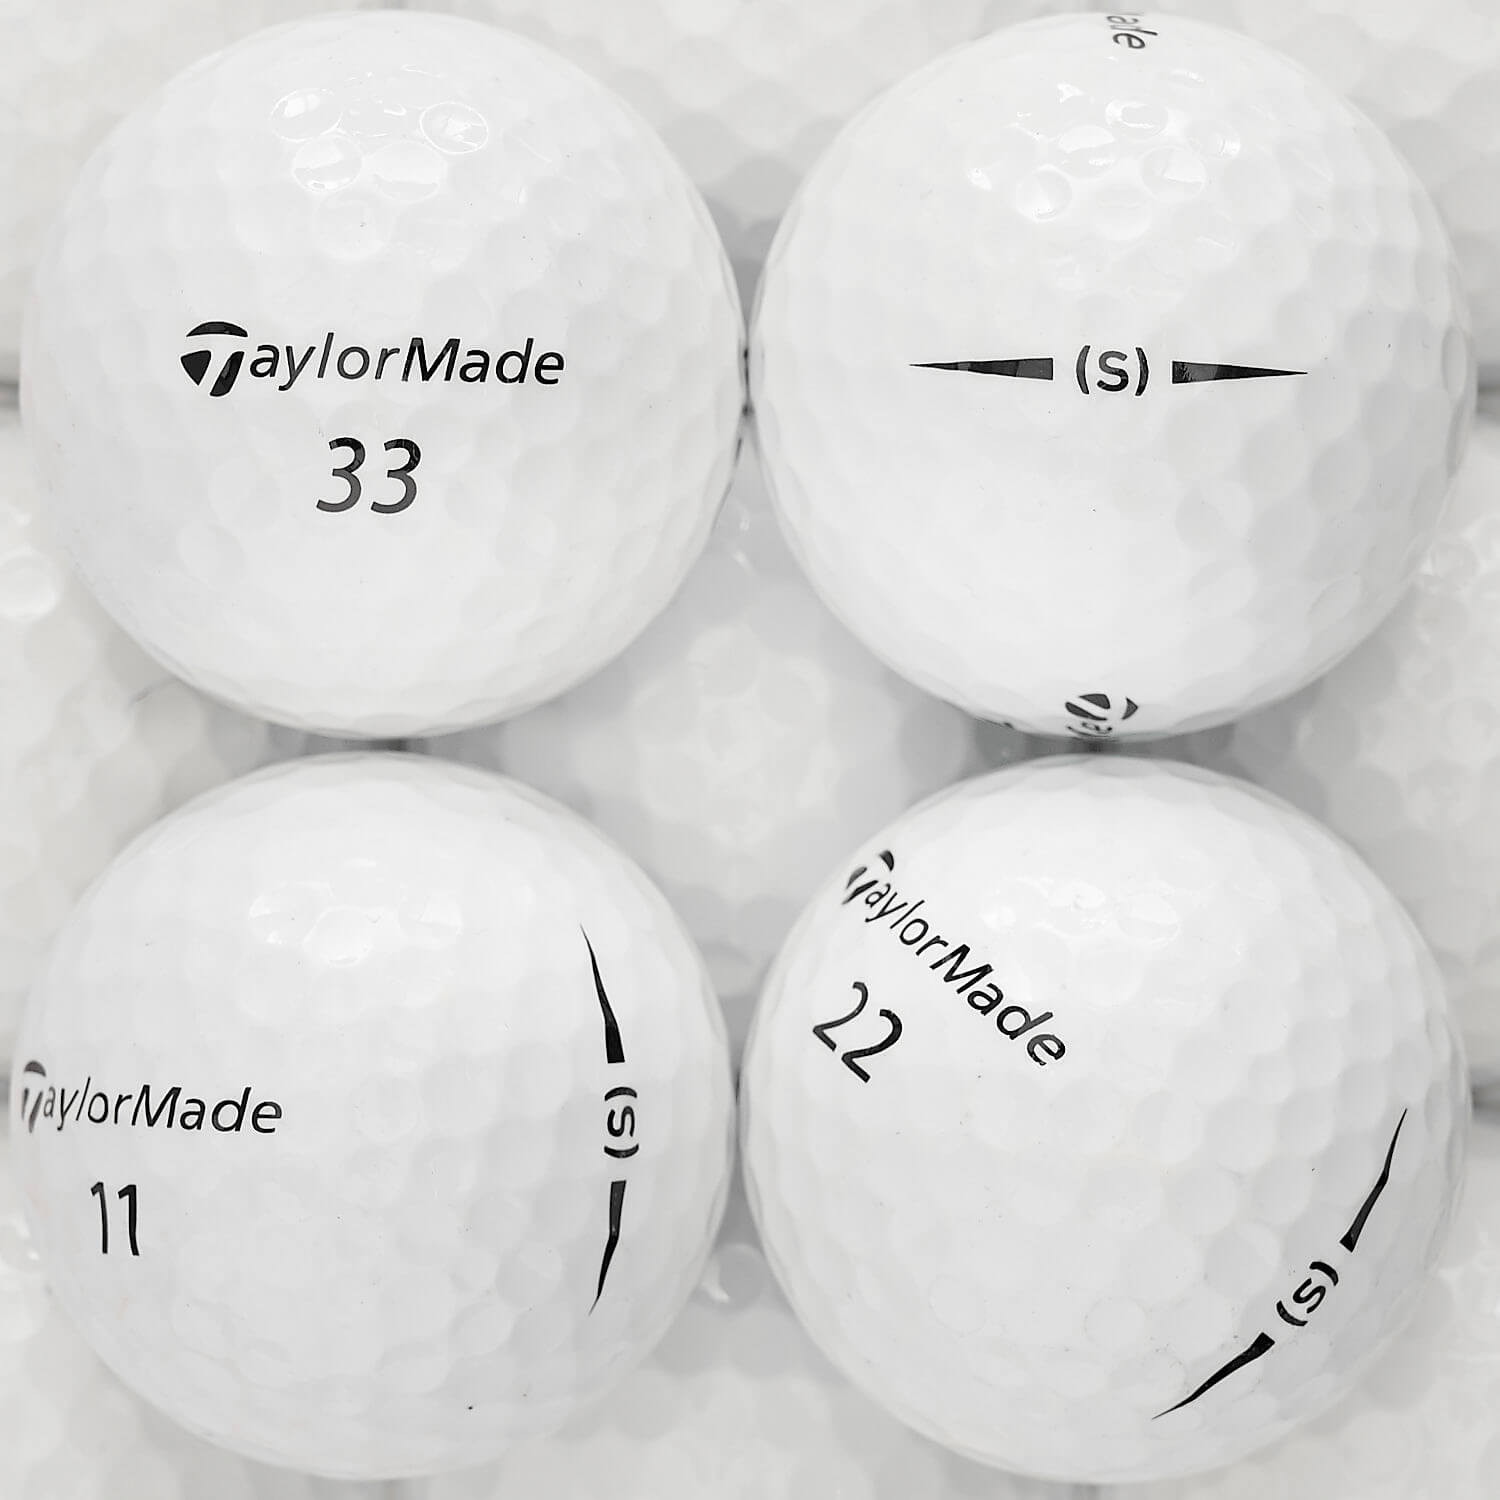 25 TaylorMade Project (s) Lakeballs